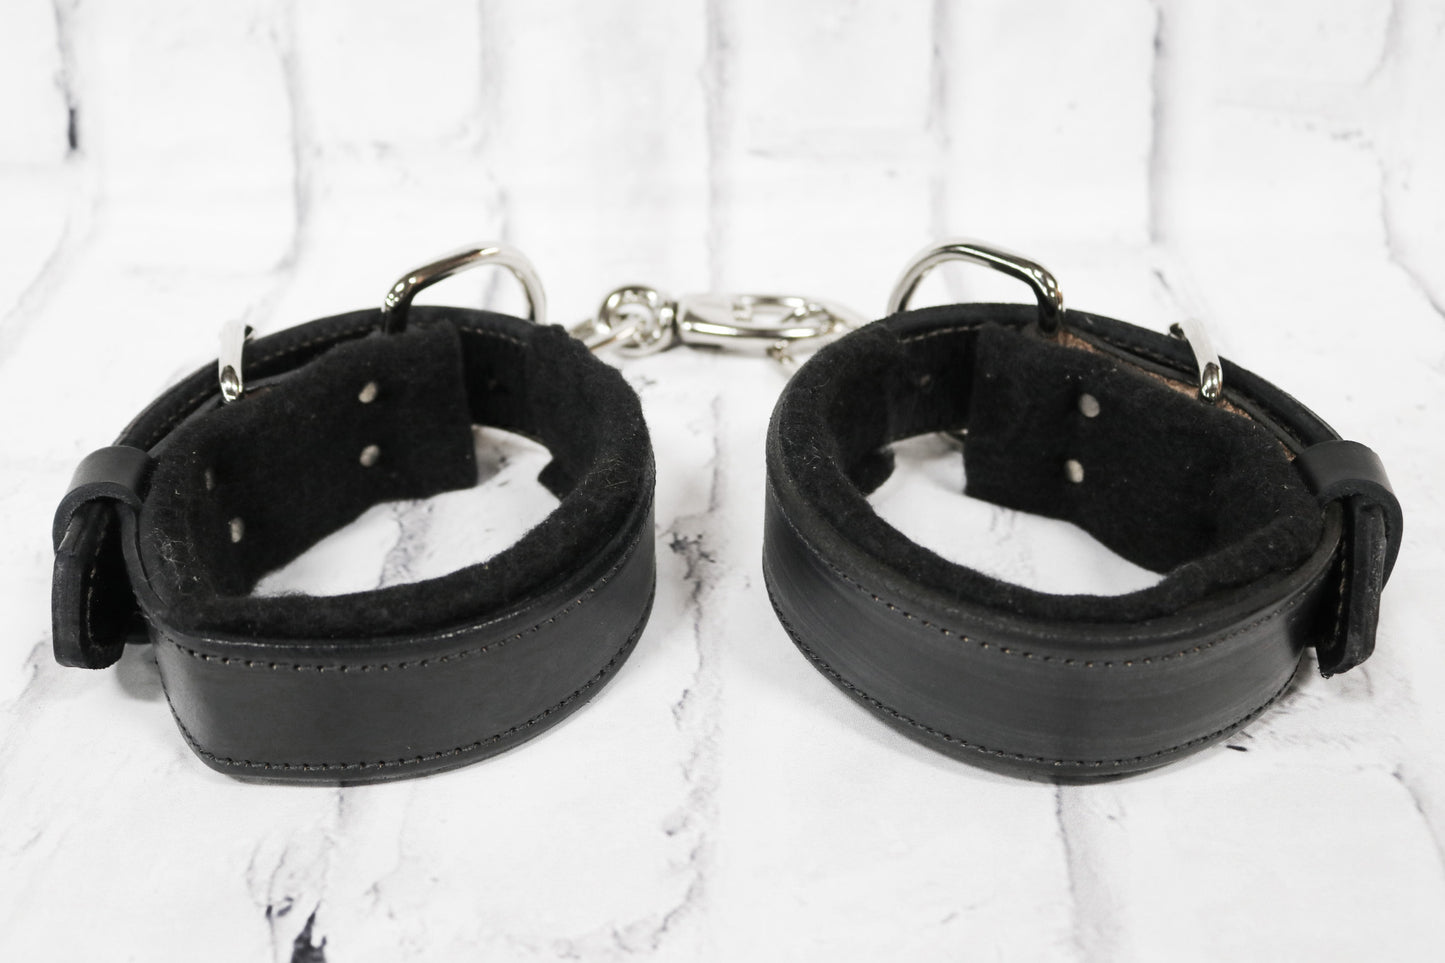 USA Made Black Doubled Leather Horse Hobbles Chain